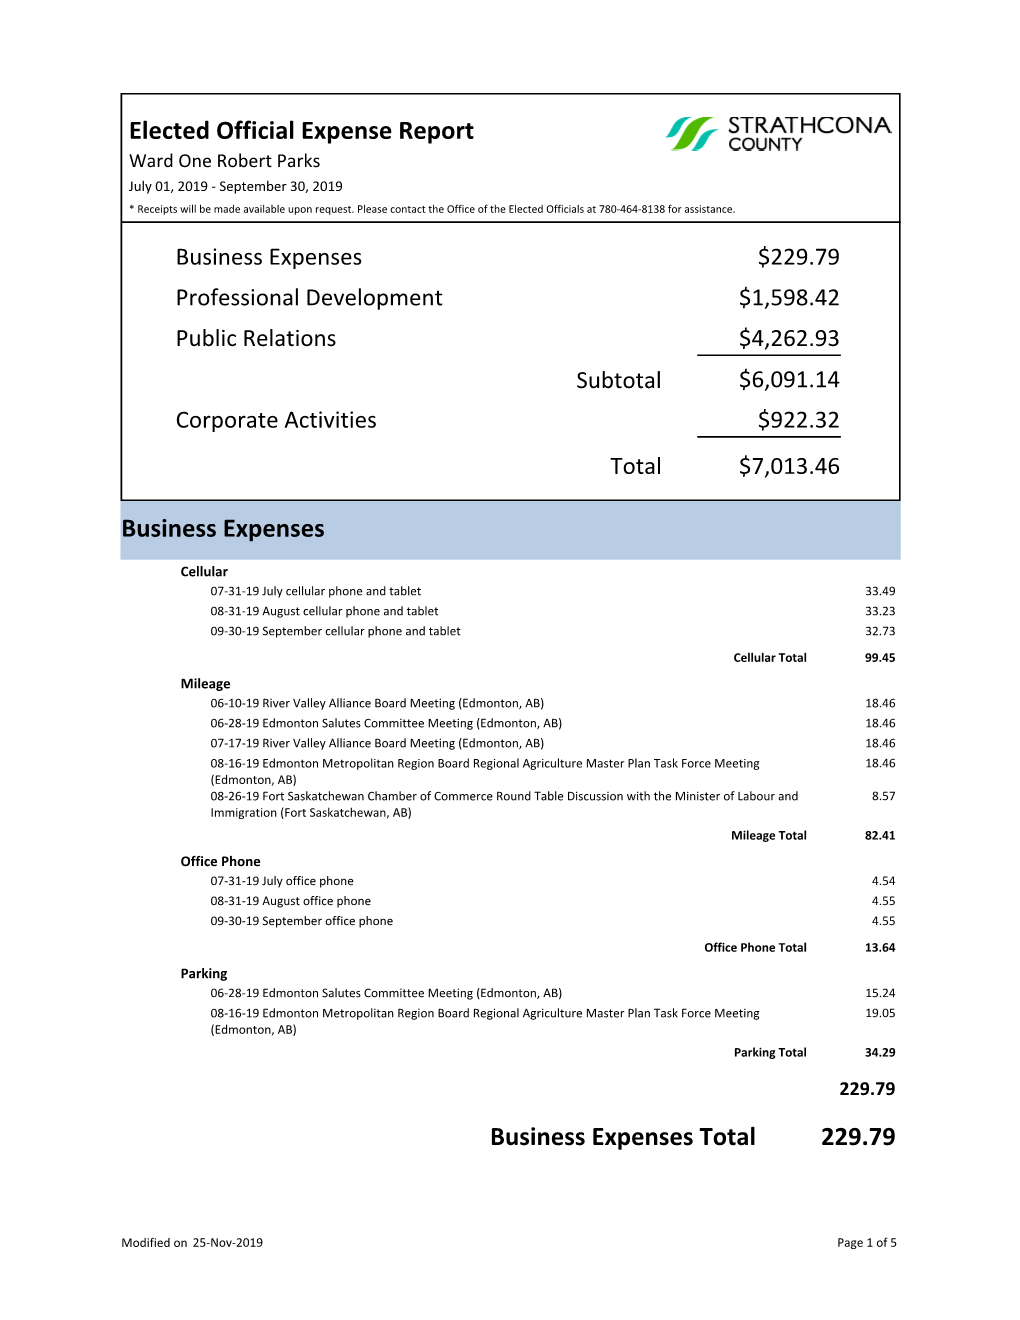 Elected Official Expense Report Business Expenses 229.79 Business Expenses Total